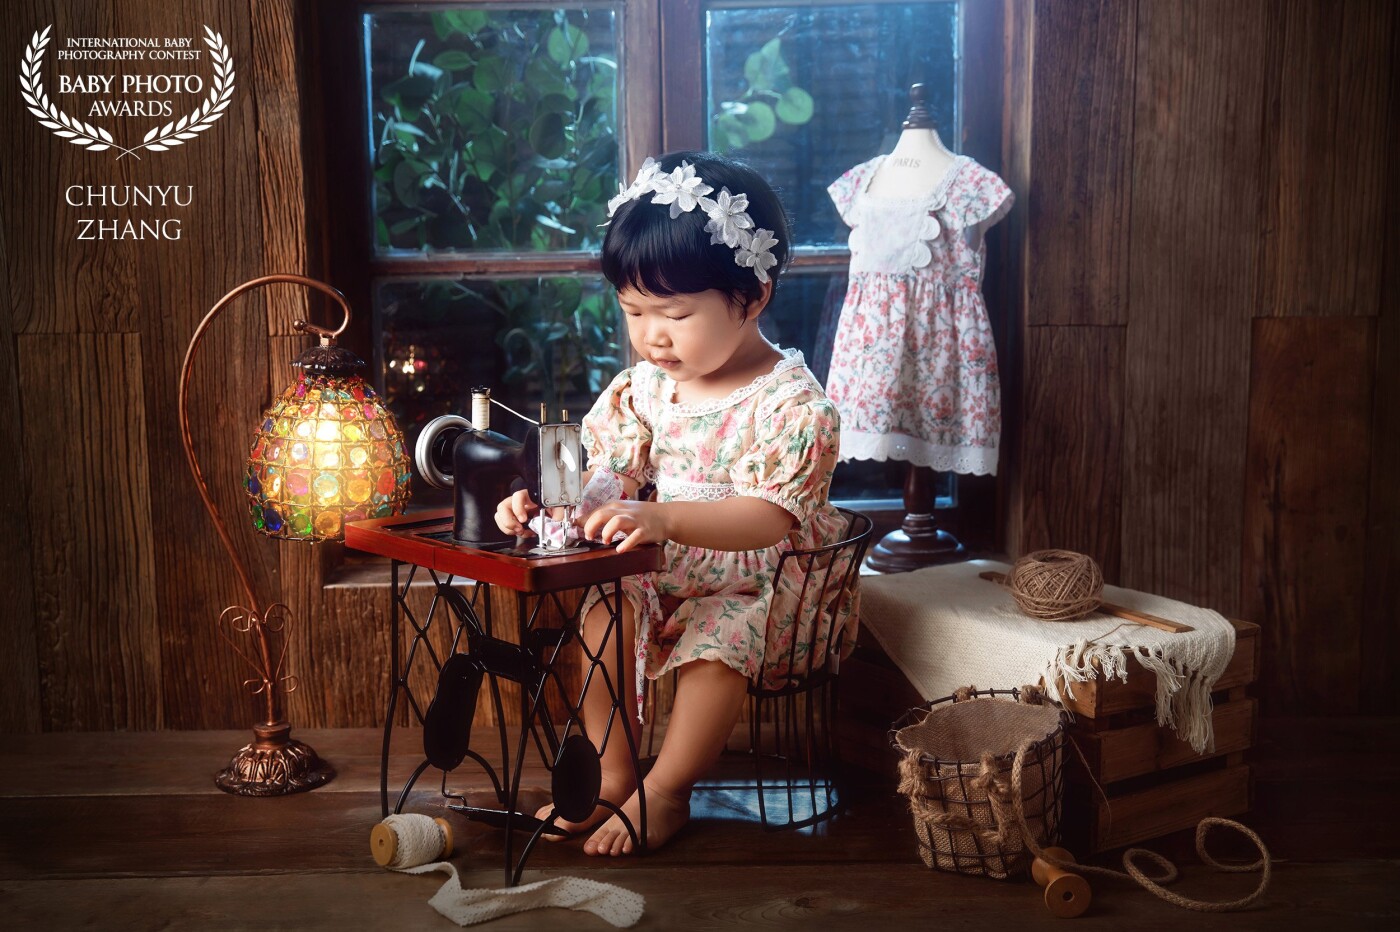 This little one likes to help with housework. Now she is even busy with sowing her own socks using granny's old sewing machine. She is so focused and concentrated, wish her good luck!